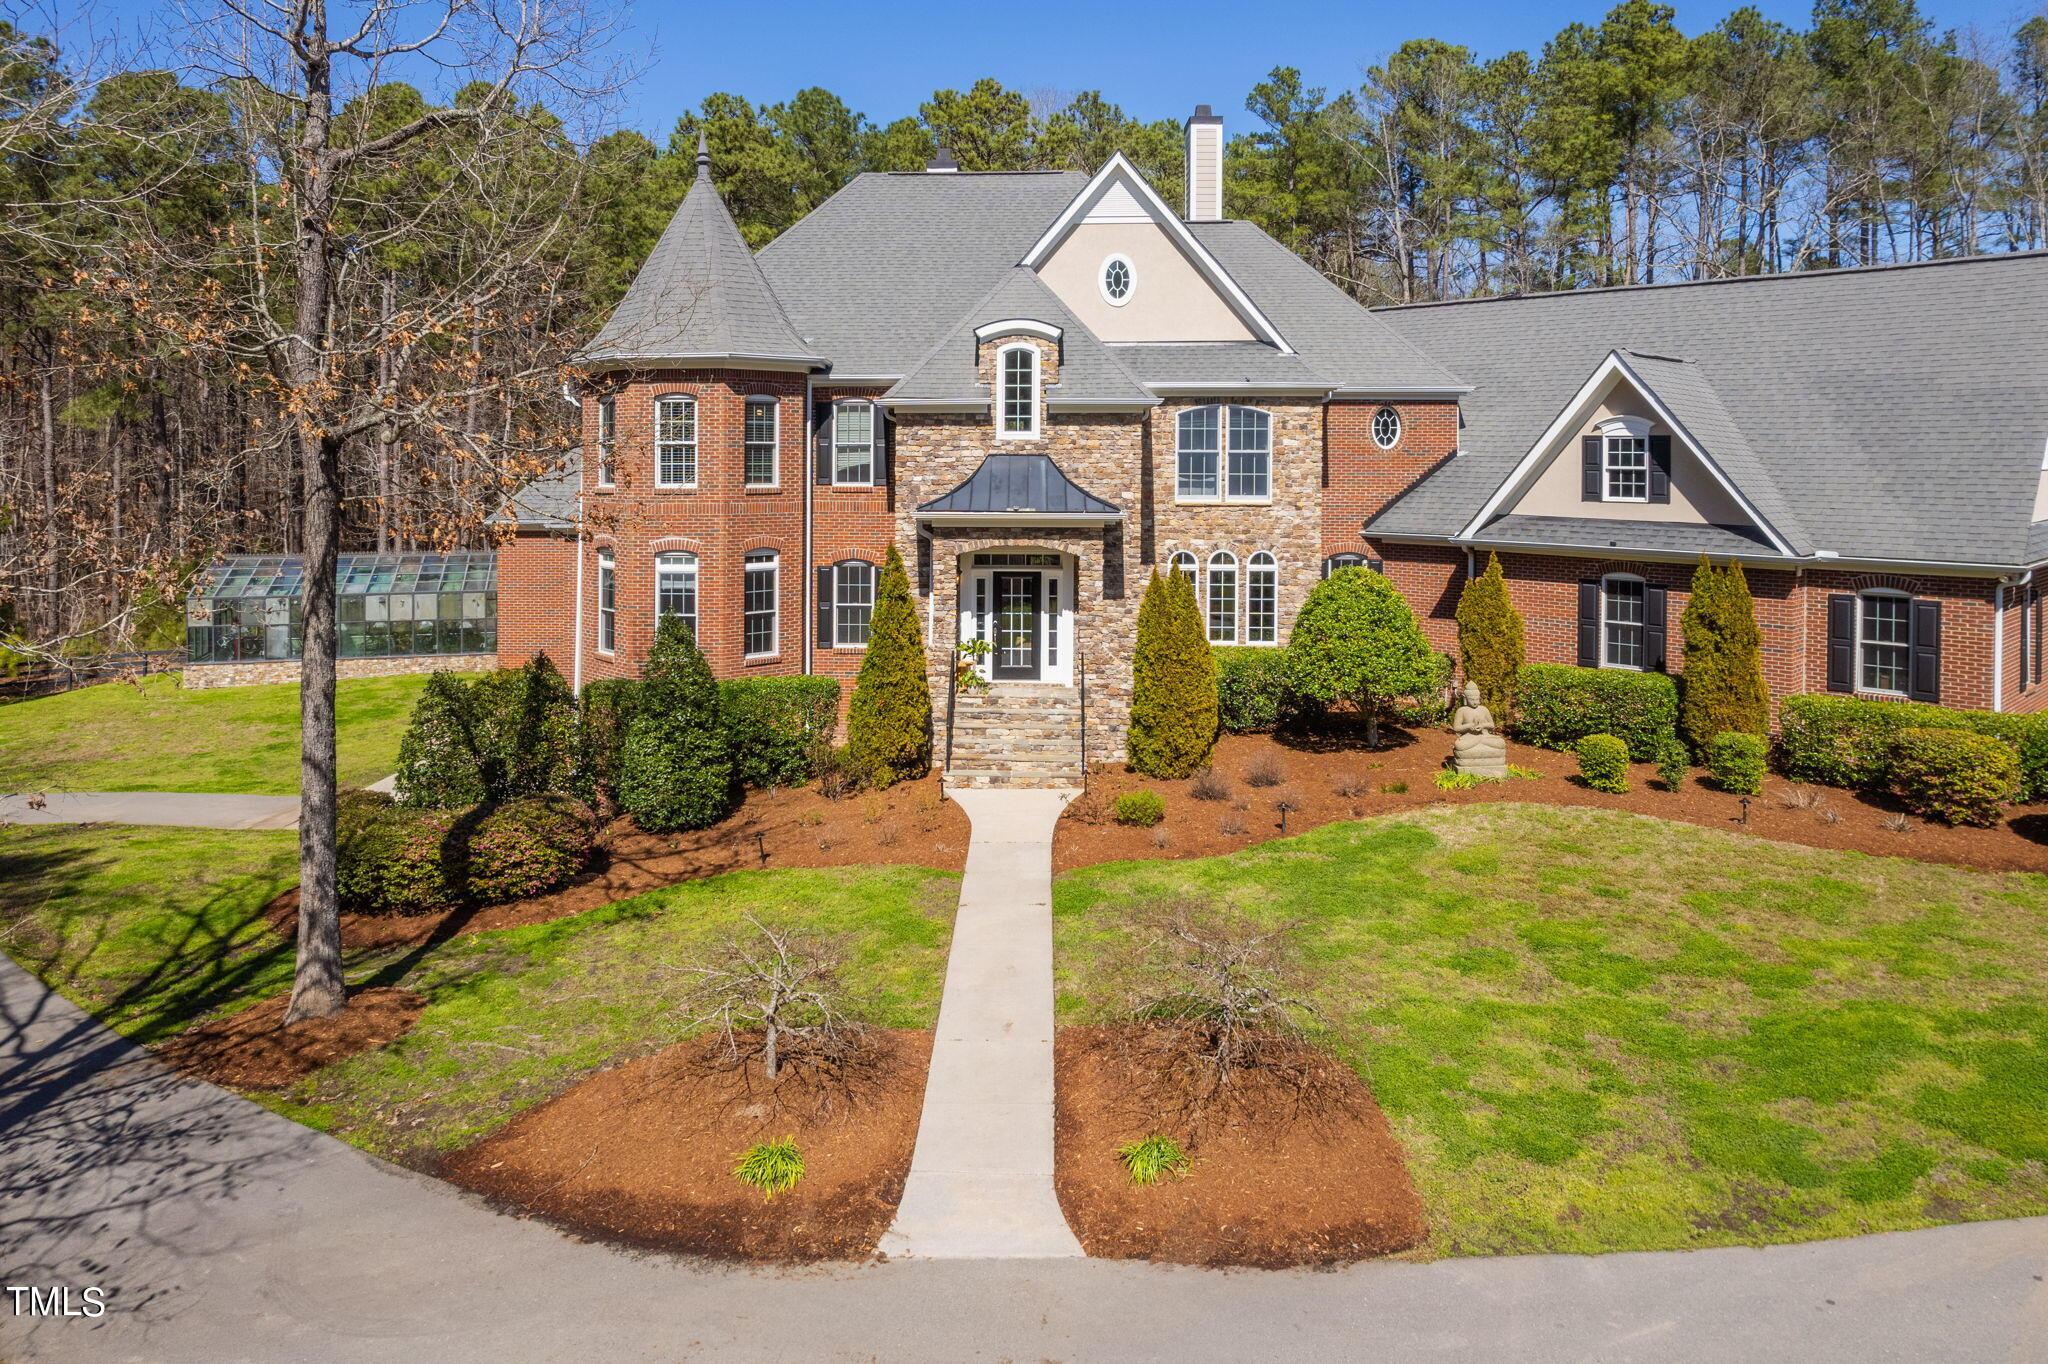 Photo one of 335 Chapel View Dr Apex NC 27523 | MLS 10017364